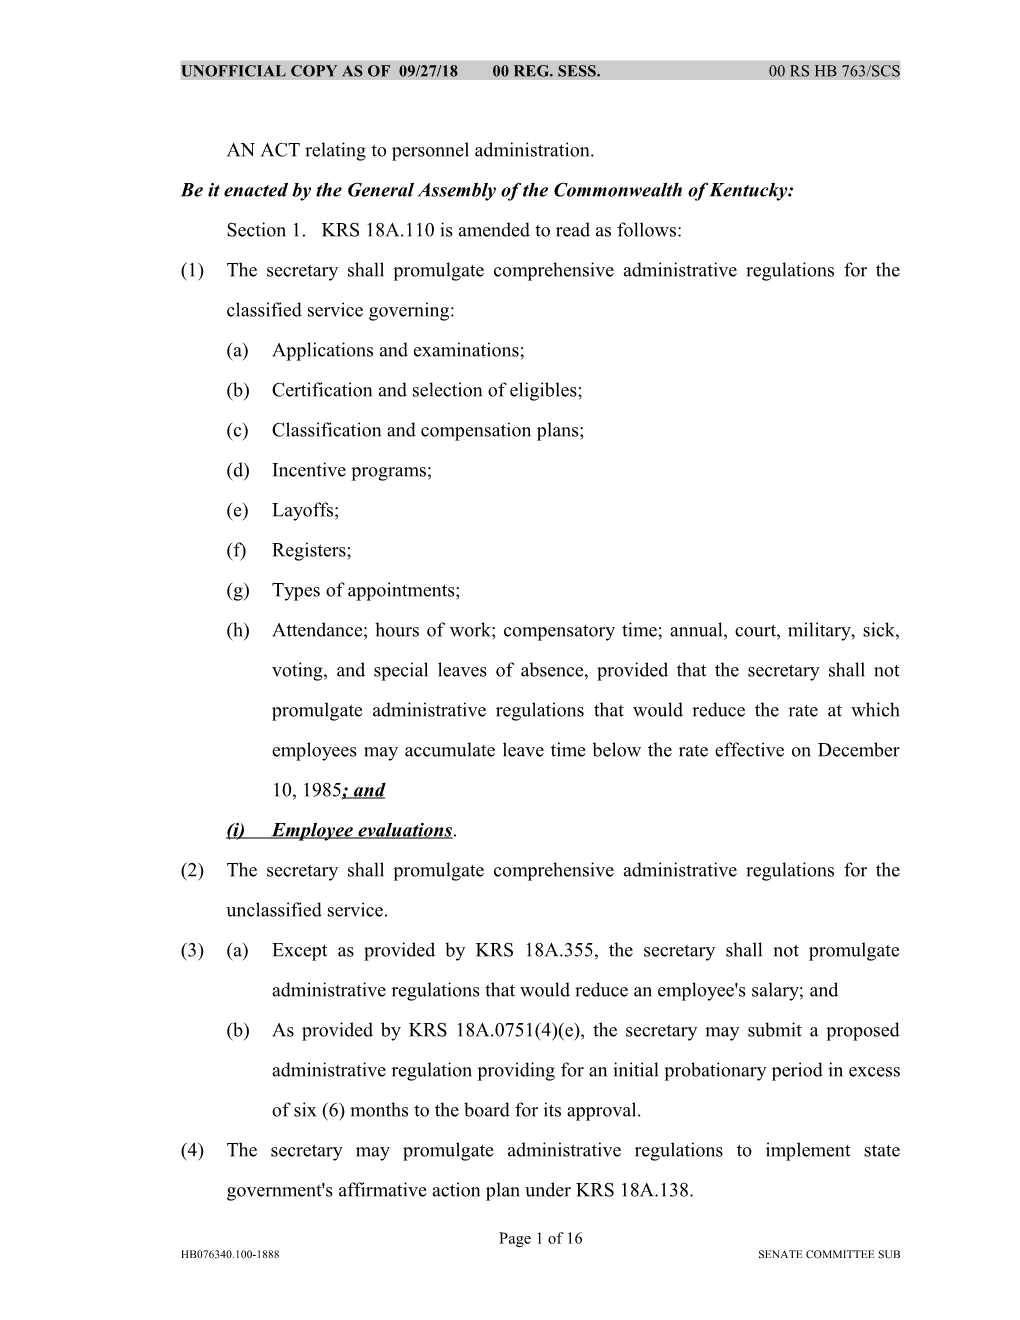 AN ACT Relating to Personnel Administration